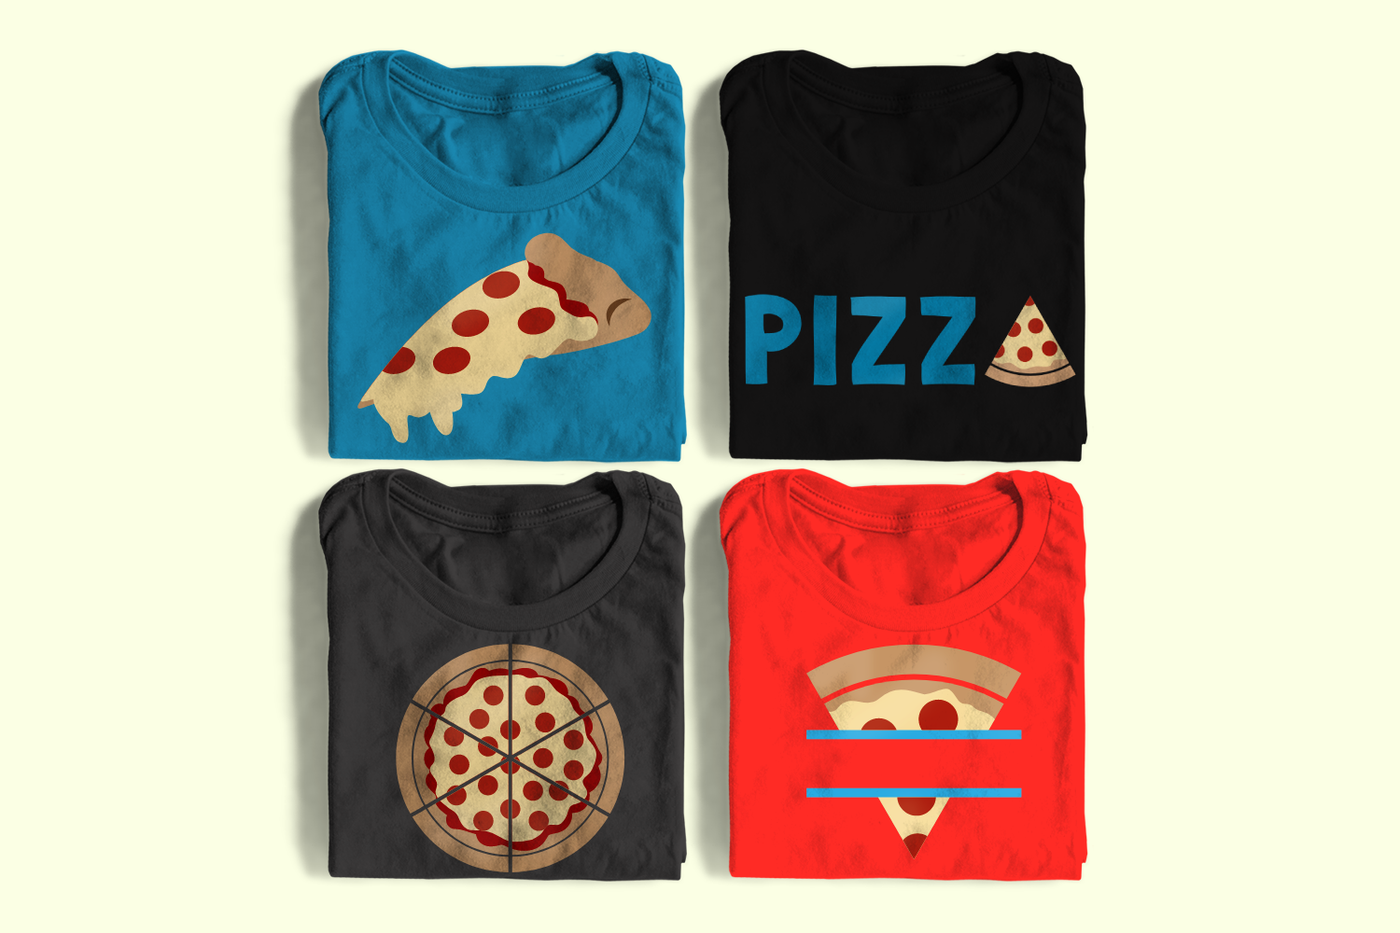 Four pizza related designs